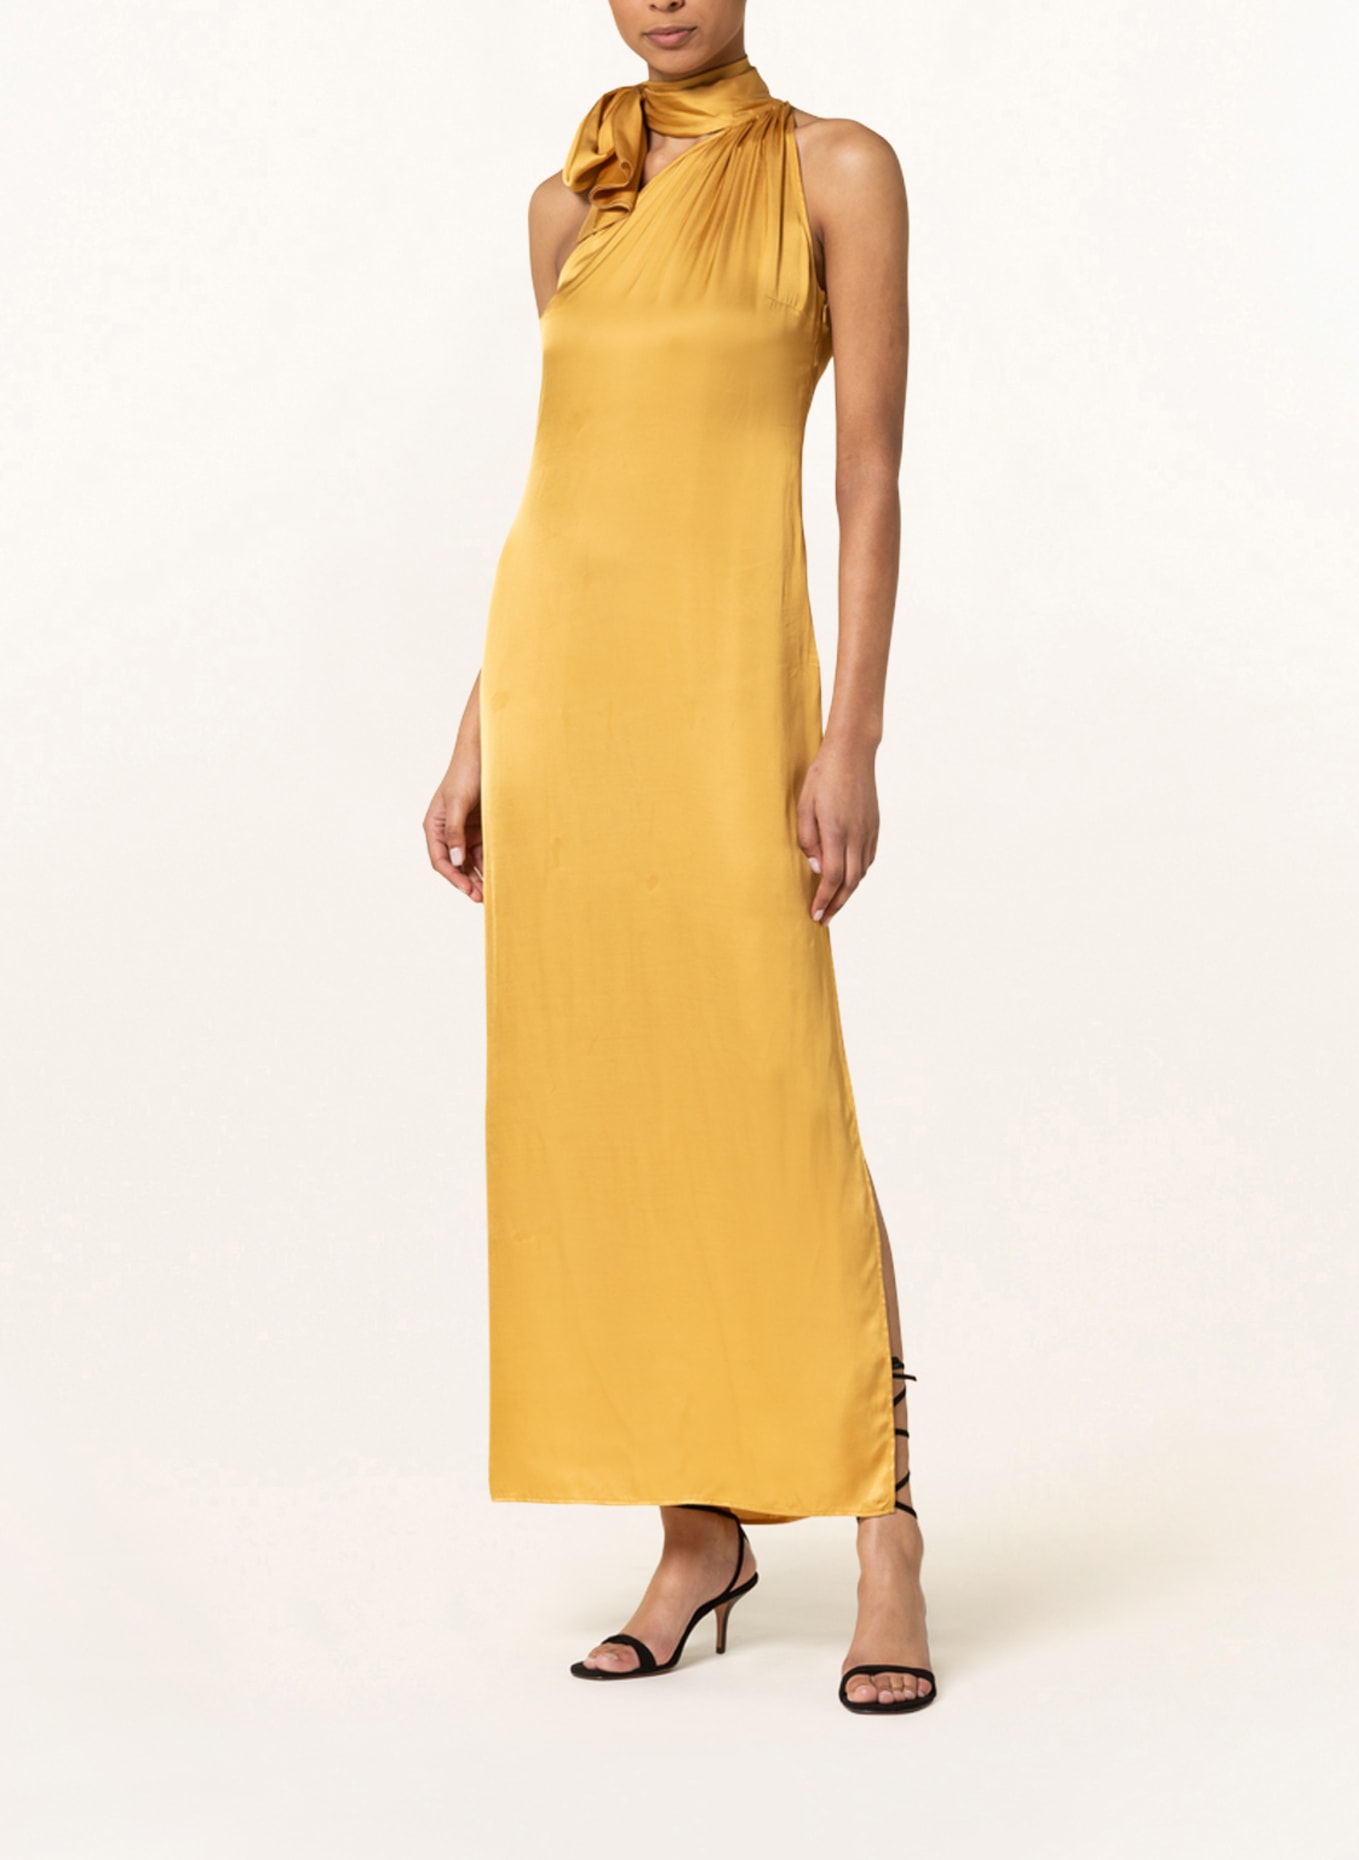 MAX & Co. One-shoulder dress MOSTRINA made of satin, Color: DARK YELLOW (Image 2)